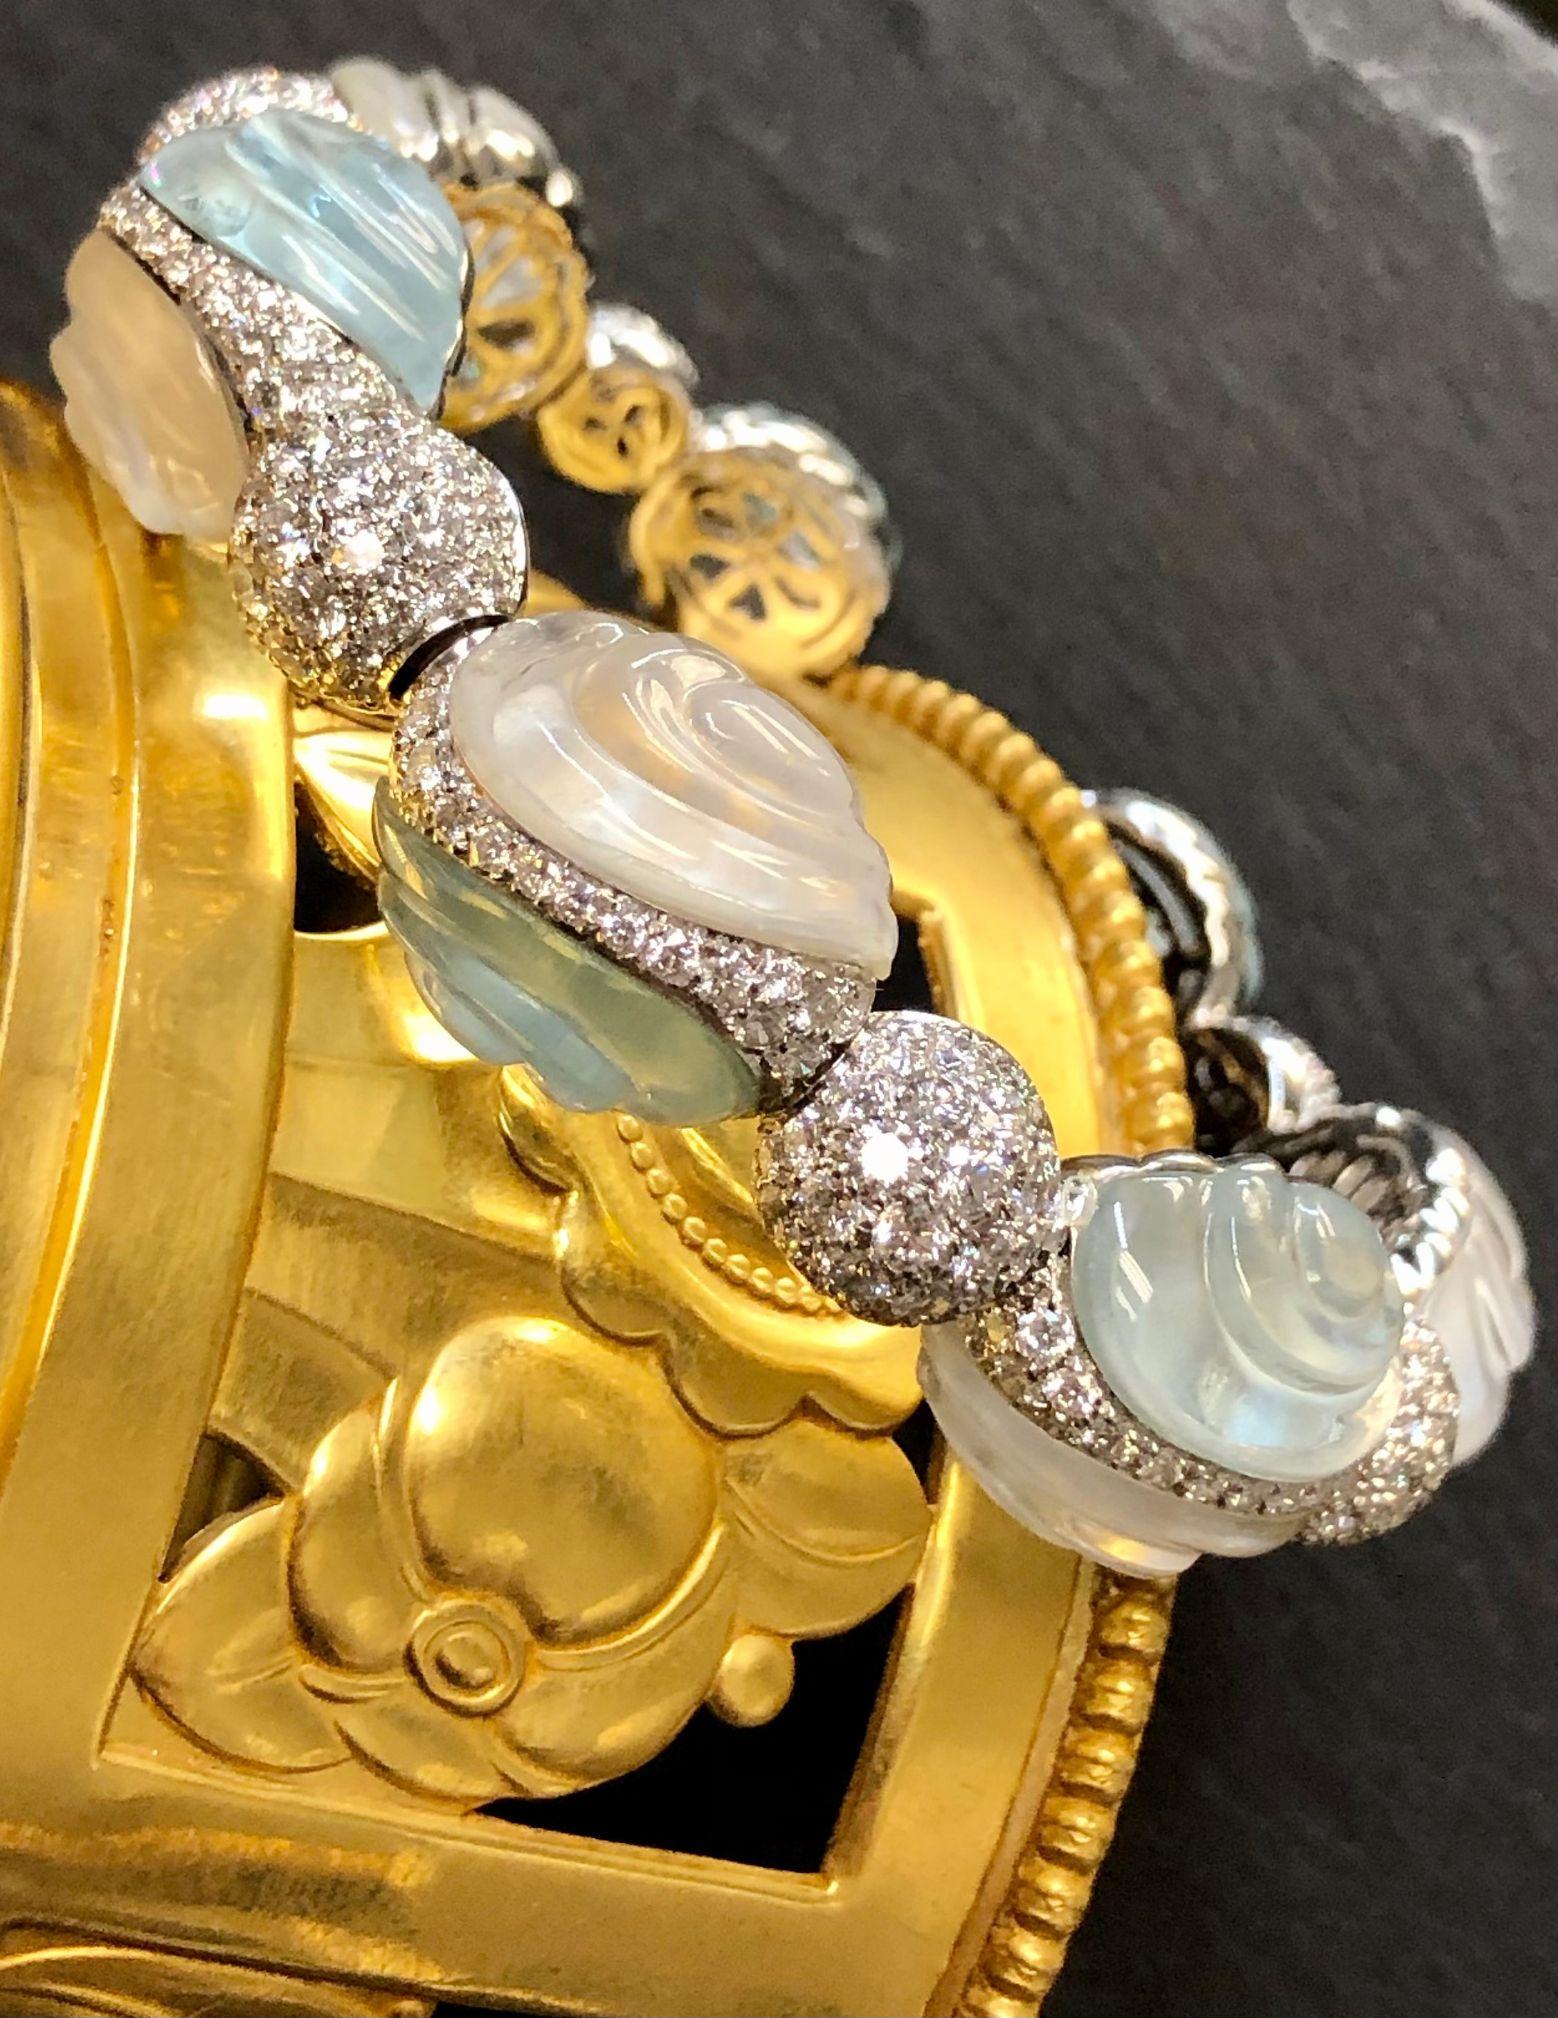 Gorgeous bangle done by Italian designer AMBROSI from their BON BON collection in 18K white gold with carved natural aquamrine and quartz as well as approximately 10.60cttw in F-G color Vs1-2 clarity diamonds.

Dimensions/Weight
.60” wide and fits a